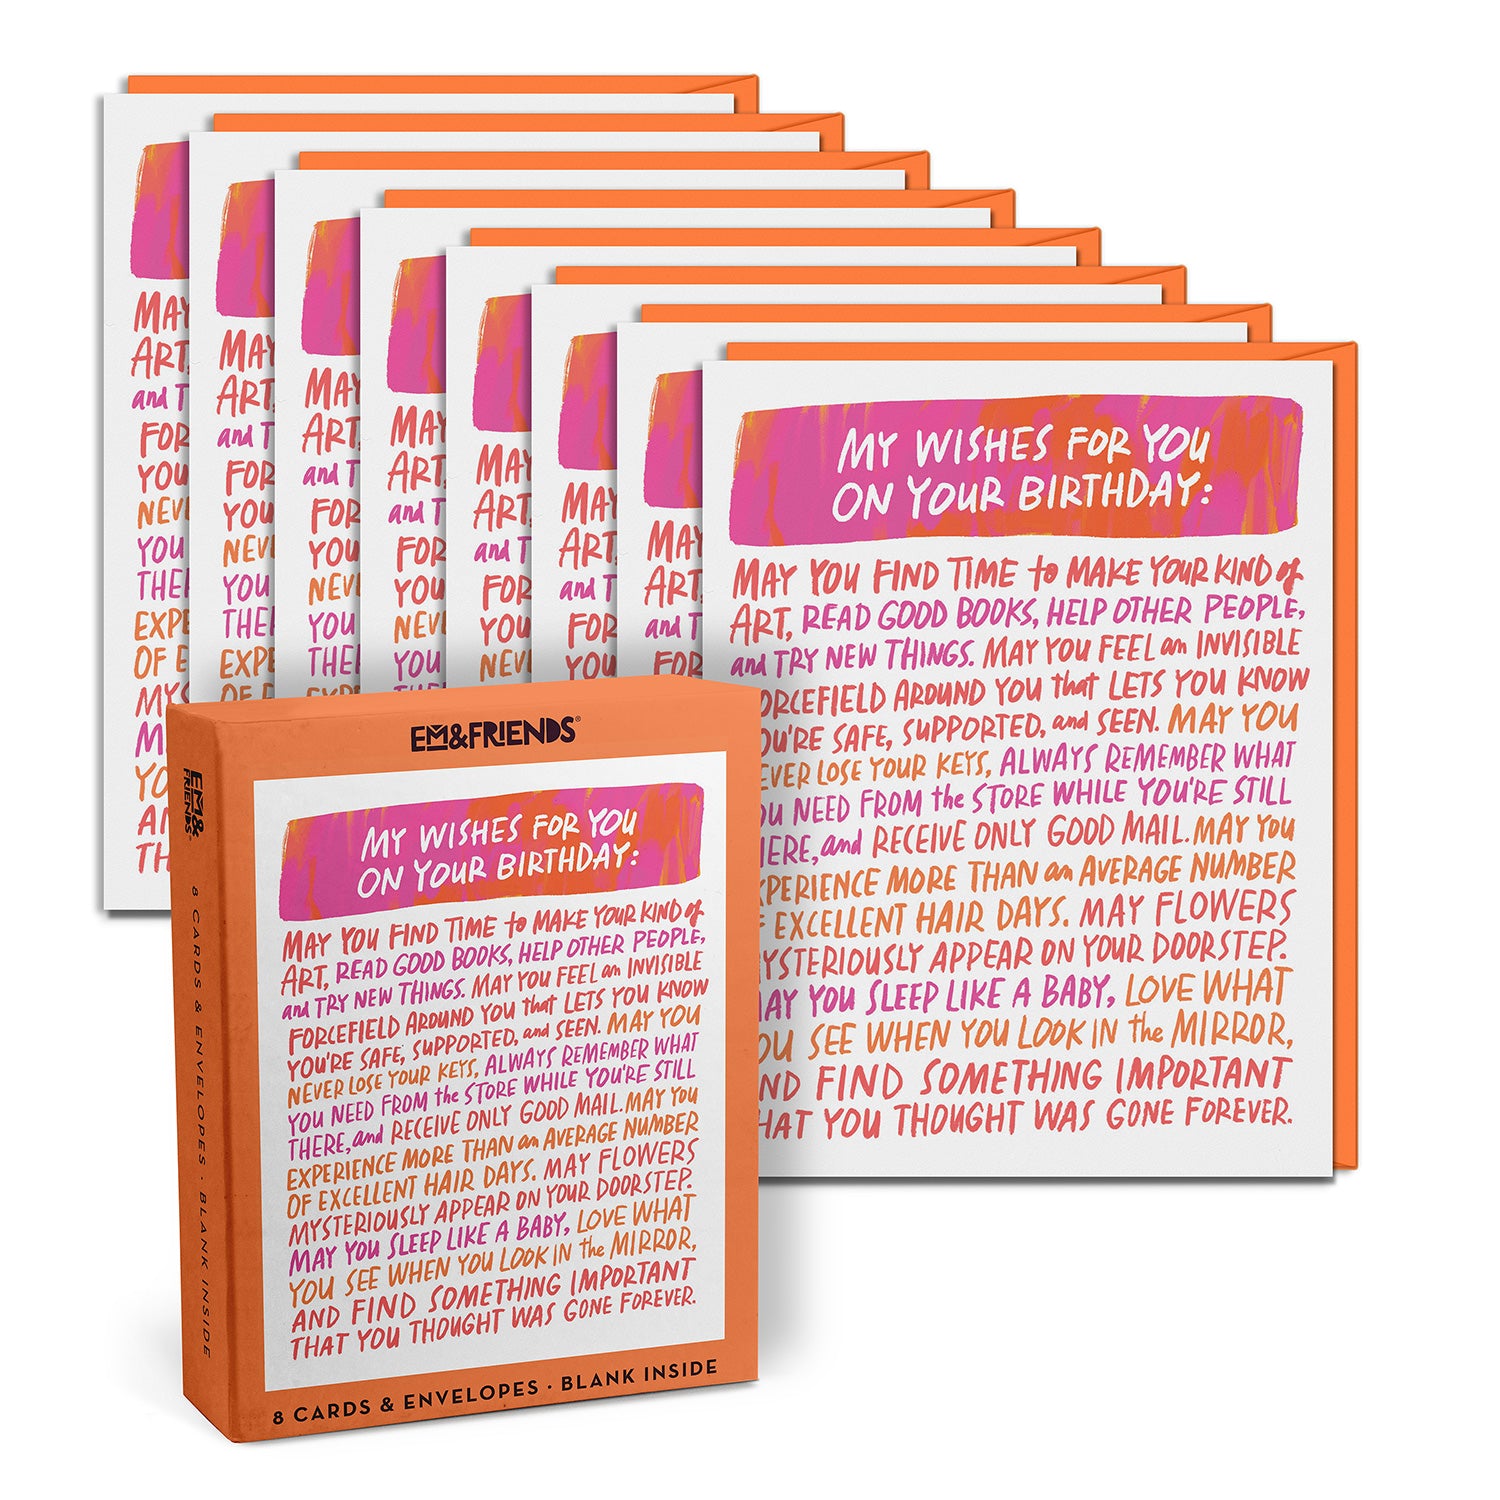 Wishes For You Card, Box Of 8 Single Birthday Cards